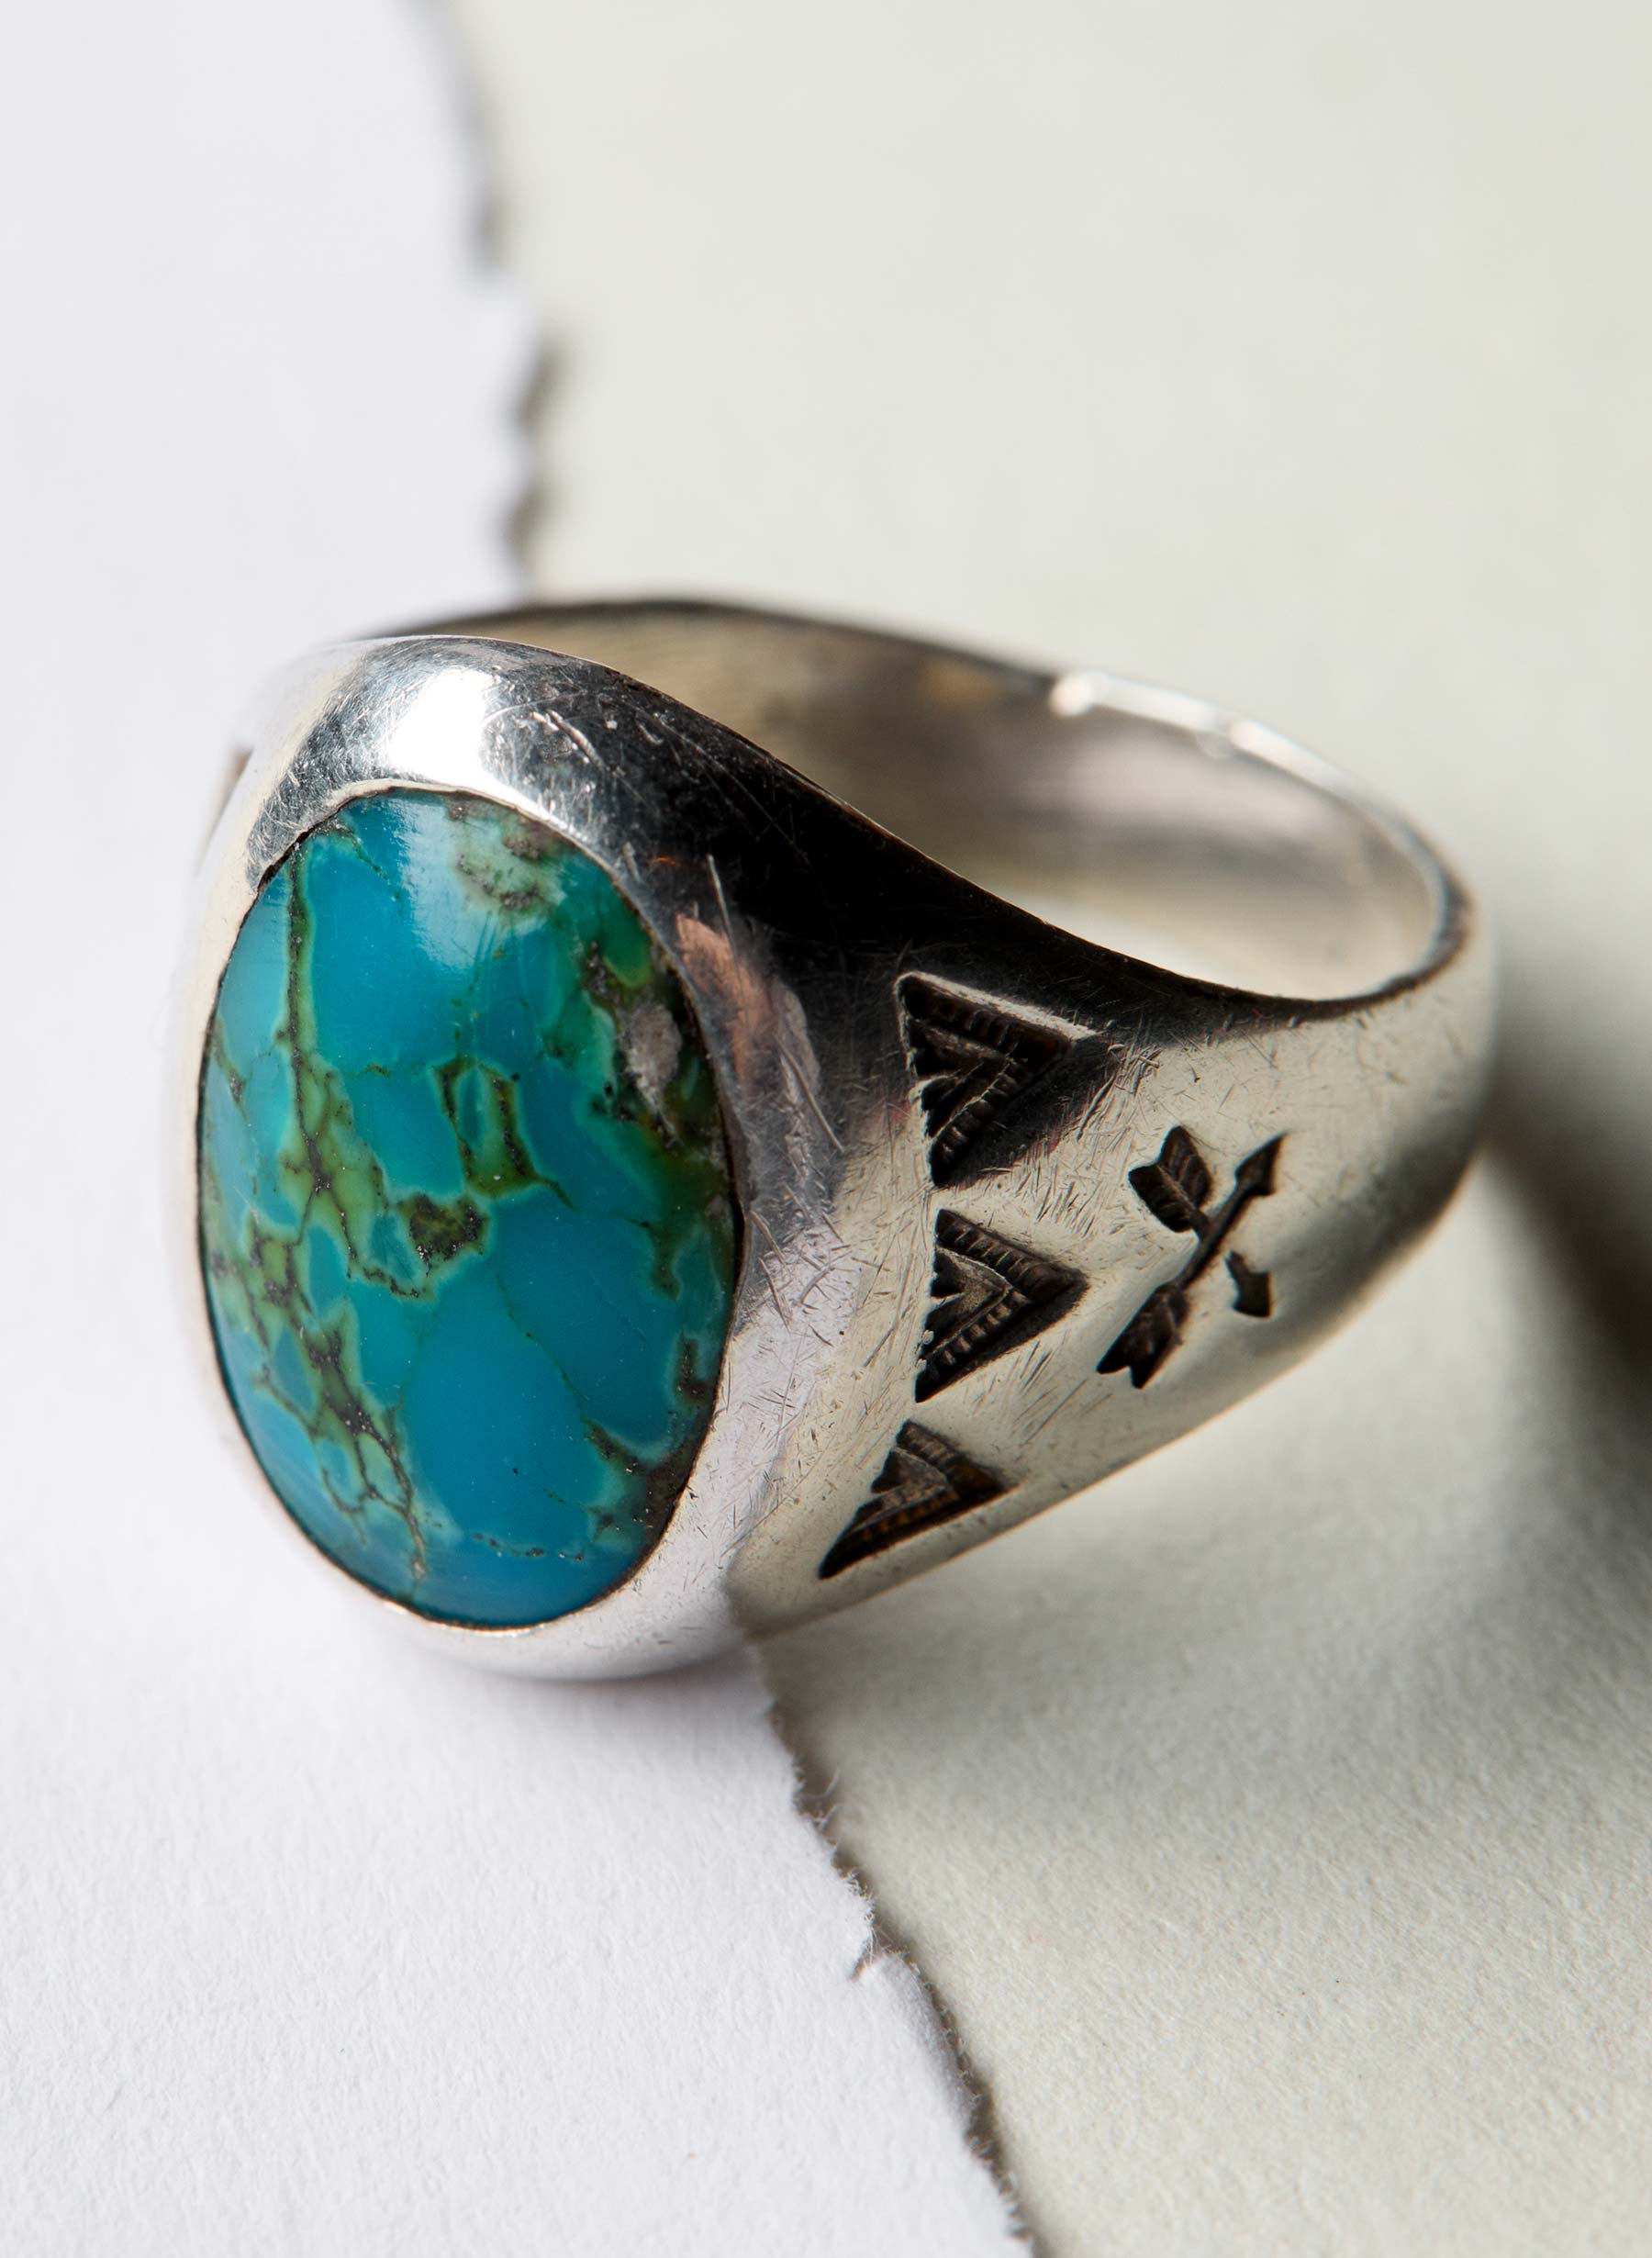 Body jewelry, Natural material, Silver, Aqua, Jewellery, Electric blue, Gemstone, Ring, Metal, Jewelry making